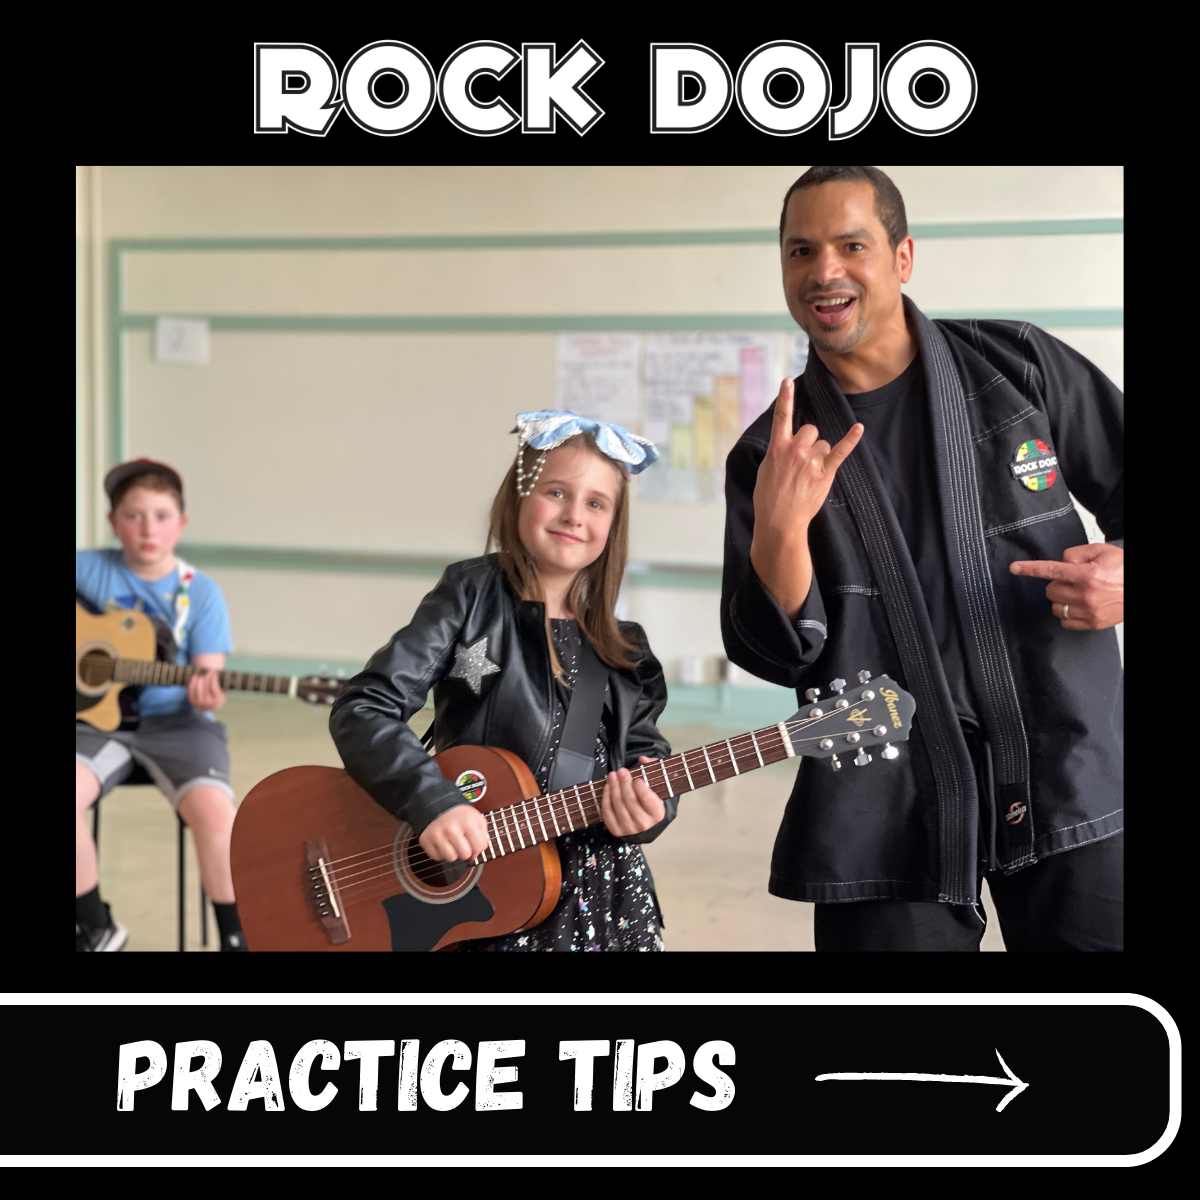 Rock Dojo guitar sensei and young student learning guitar practice techniques together